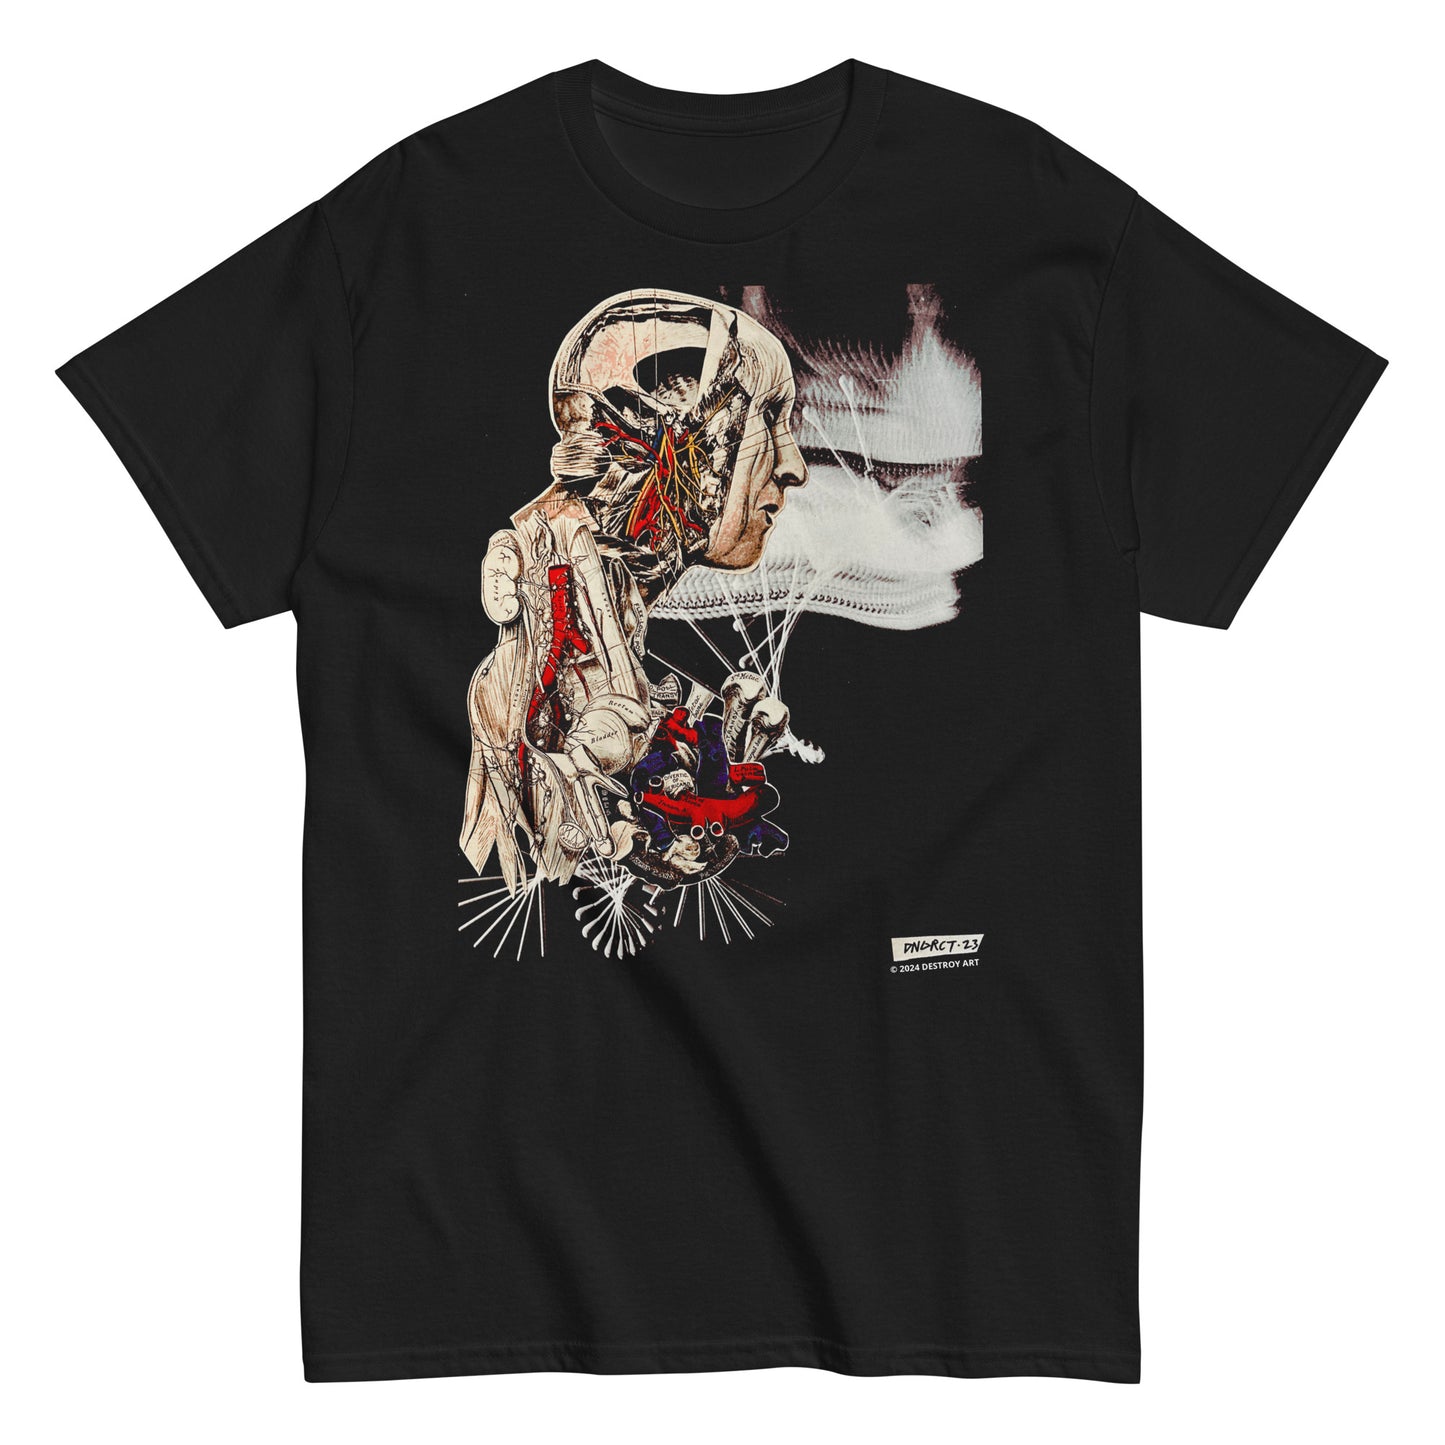 DNGRCT "Humanoid Android Morgue" Tee